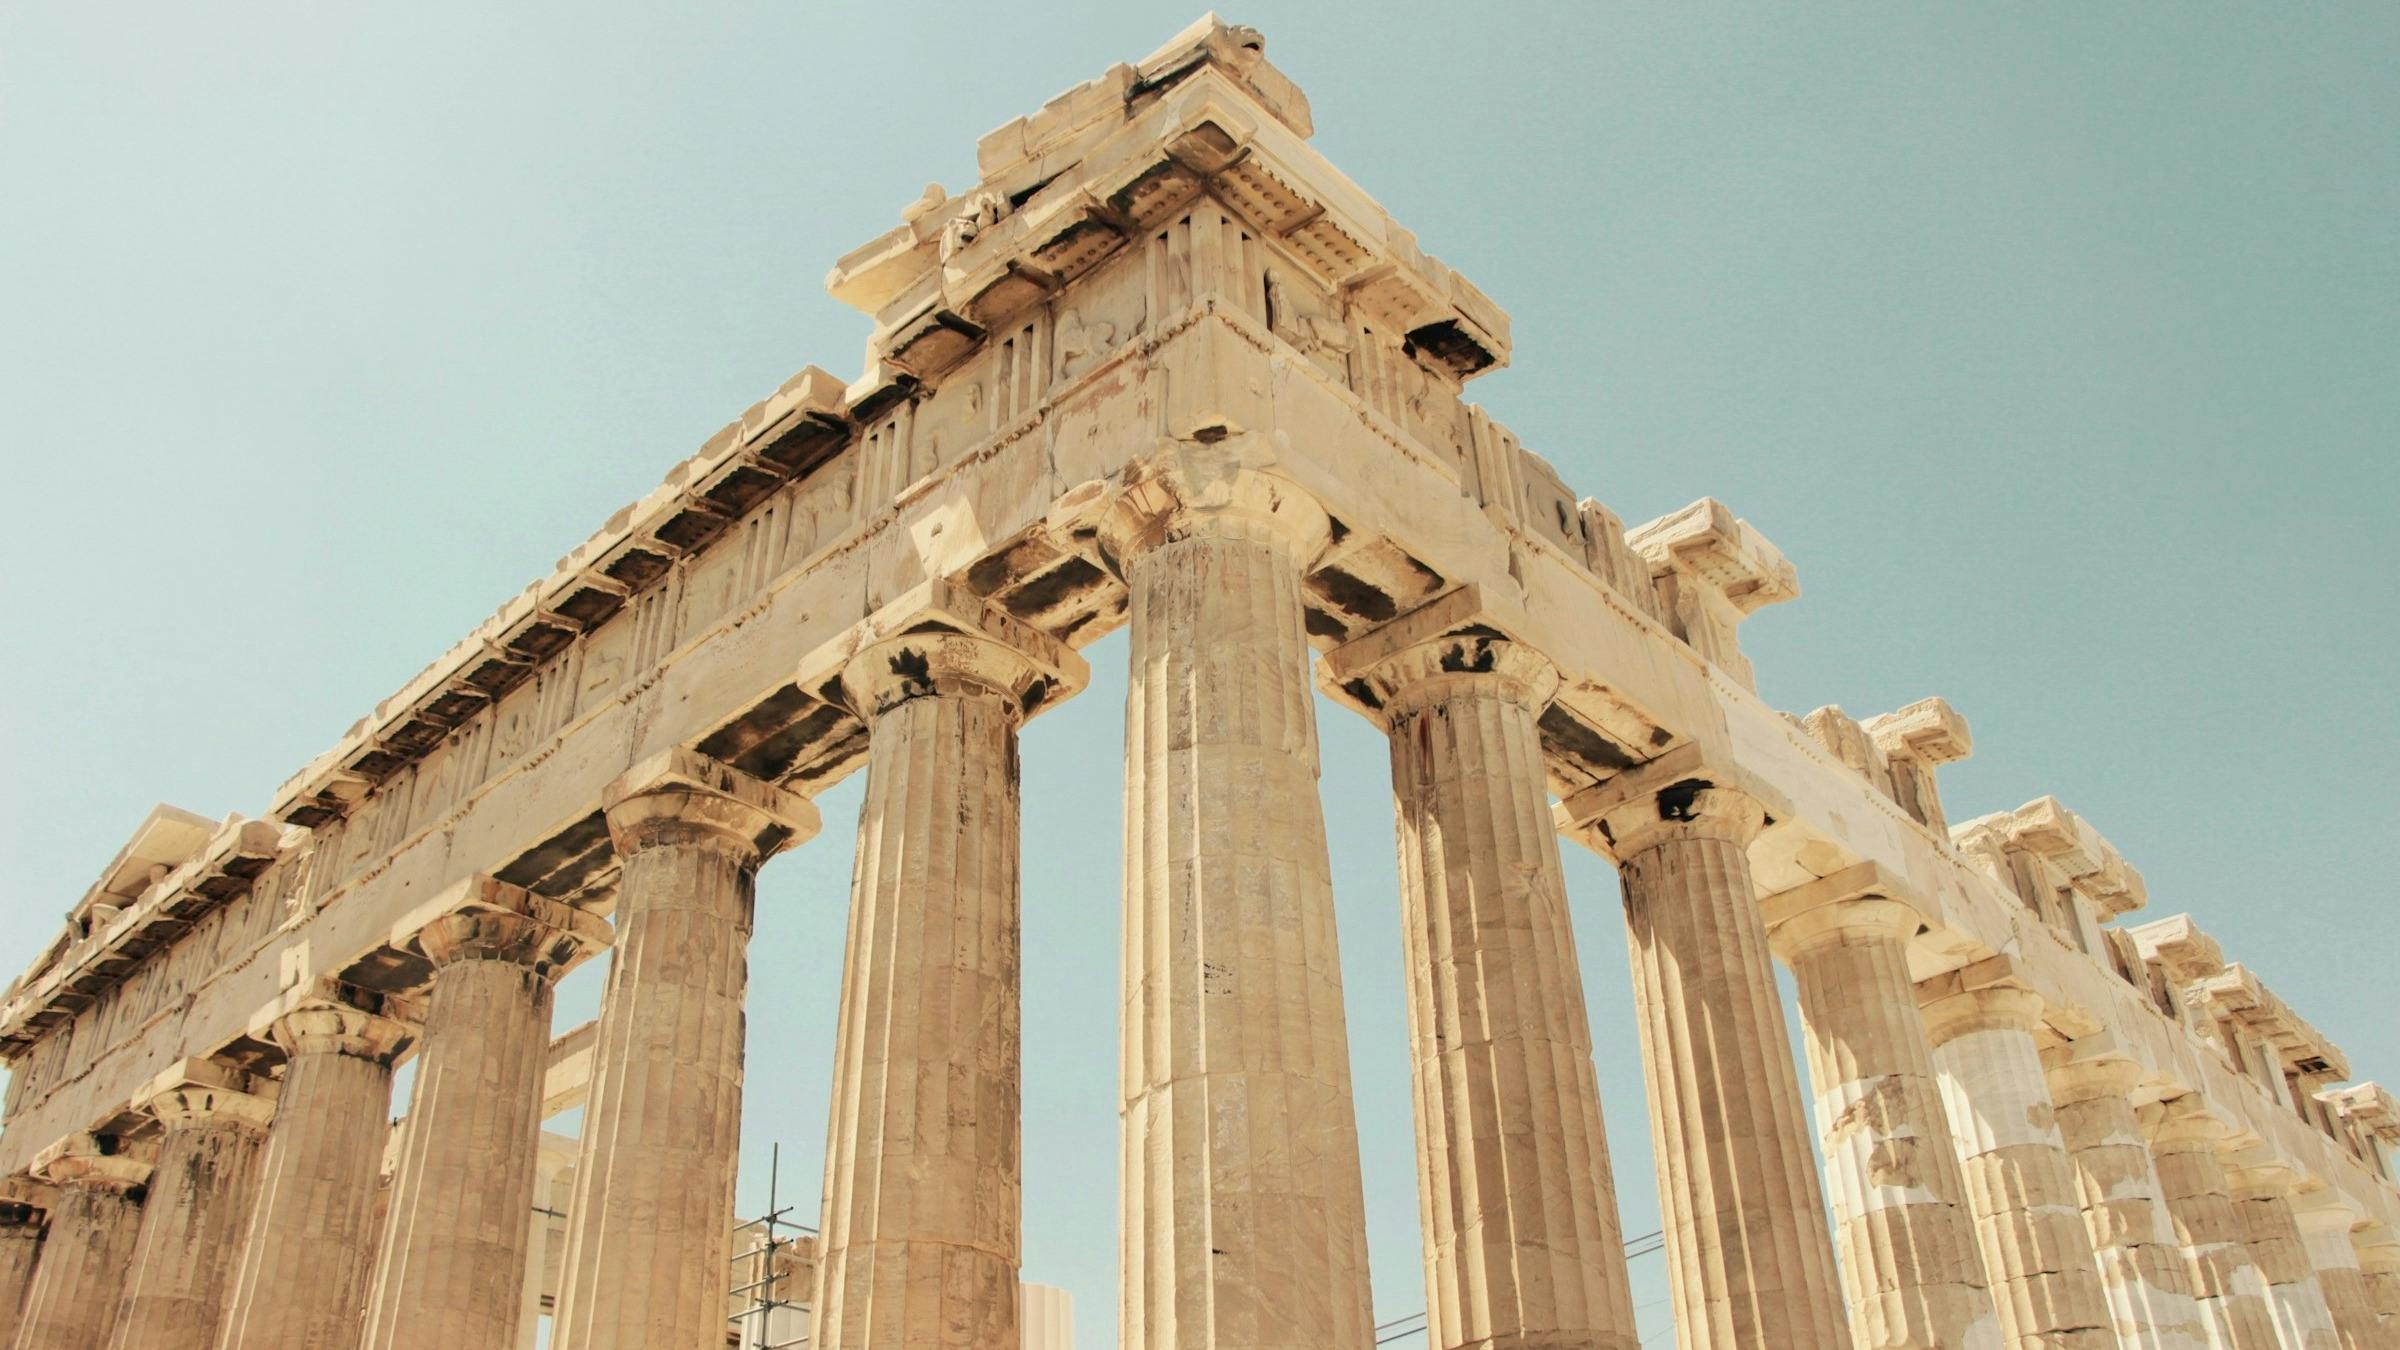 Low-angled view of a corner of the Acropolis with its many pillars